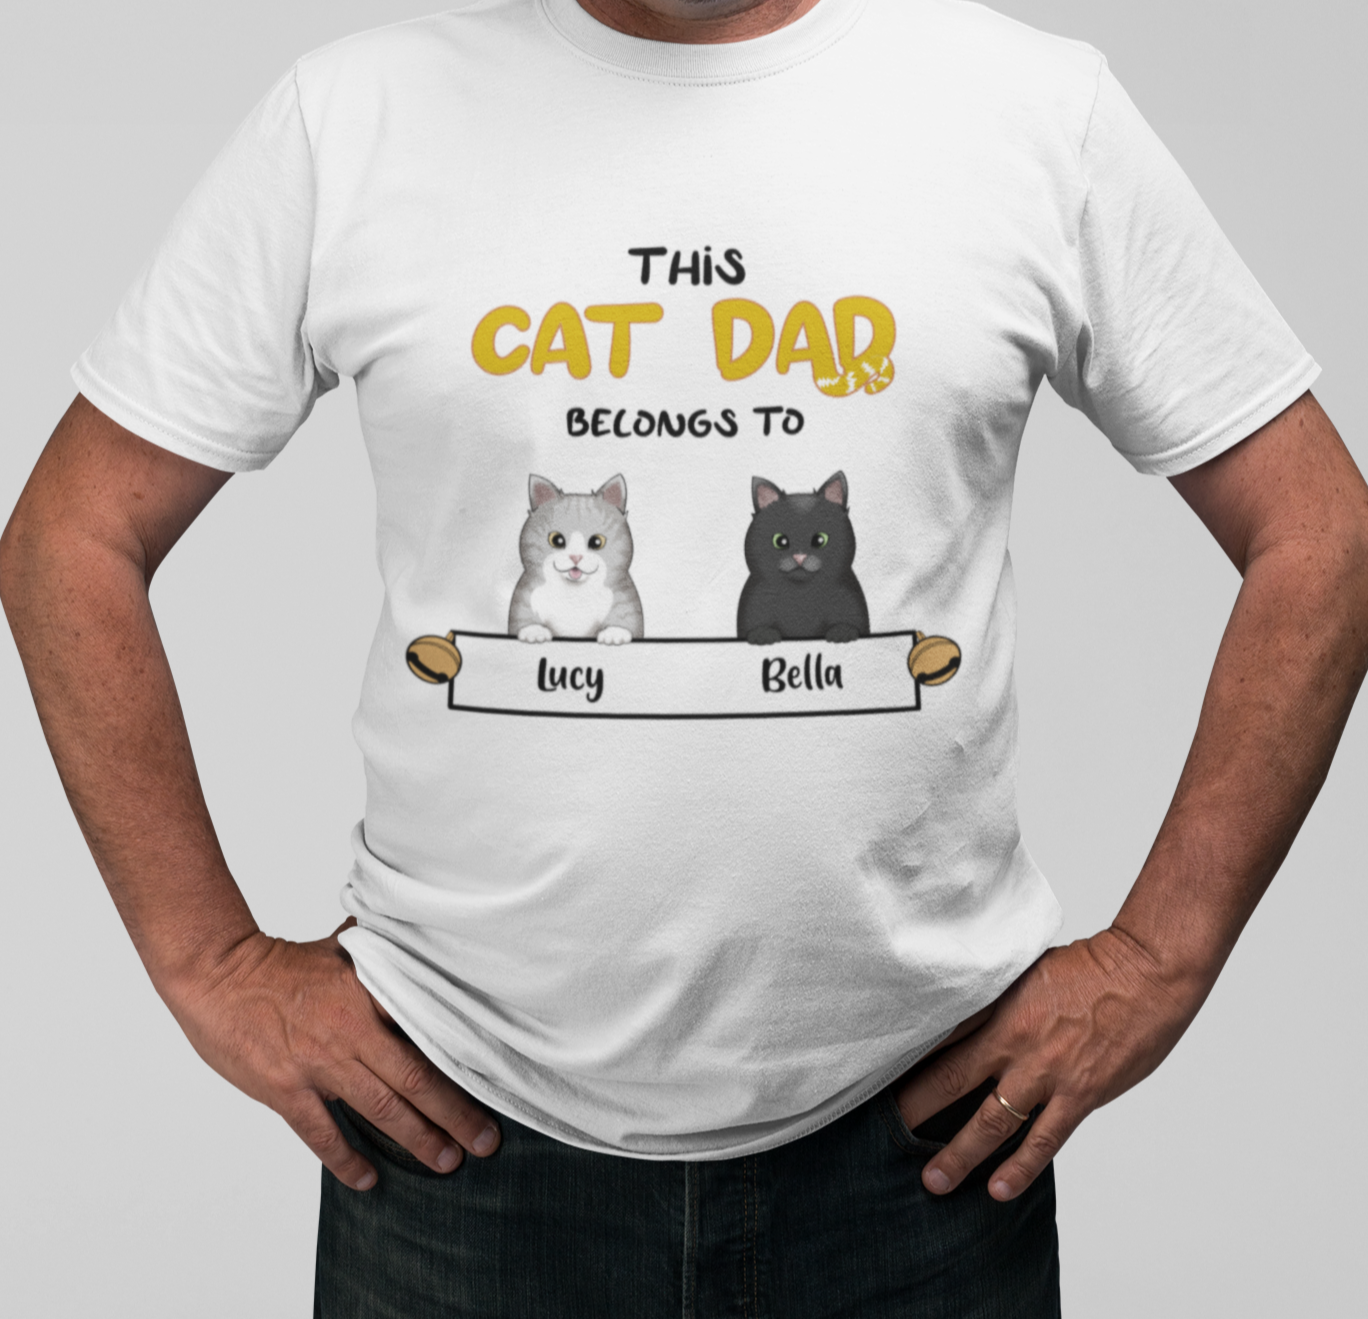 Man wearing a Personalized Cat Dad T-Shirt with unique cat motif print.